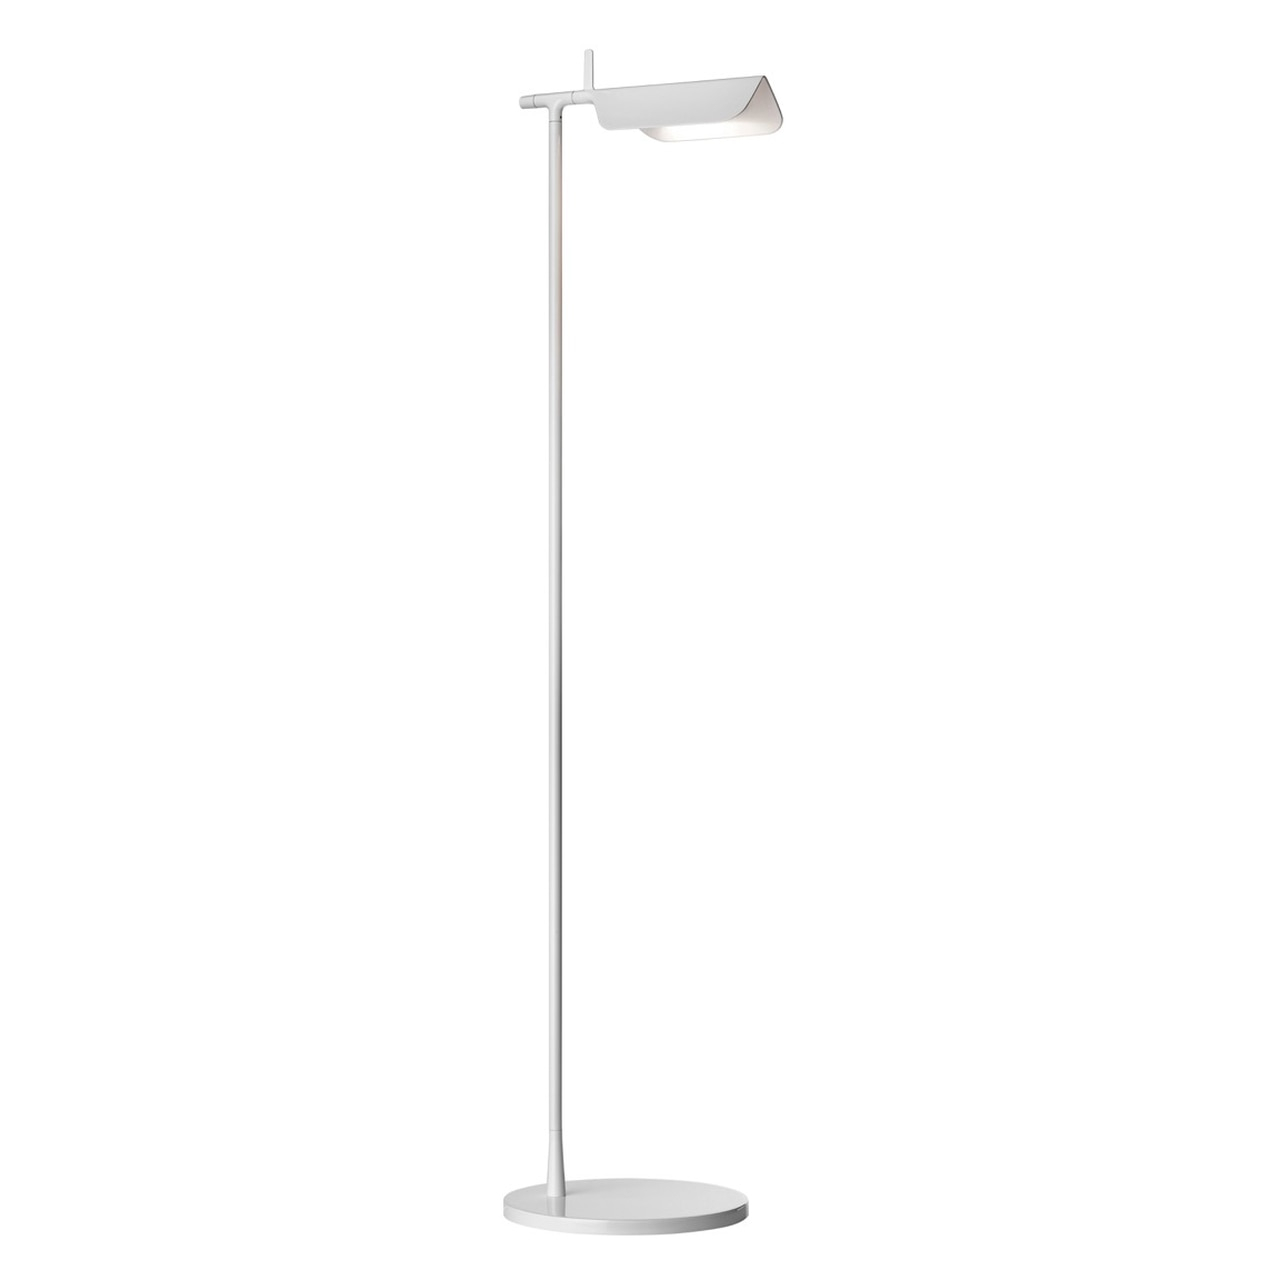 Tab F Led Floor Lamp With Adjustable Head In White Or Black throughout sizing 1152 X 1152